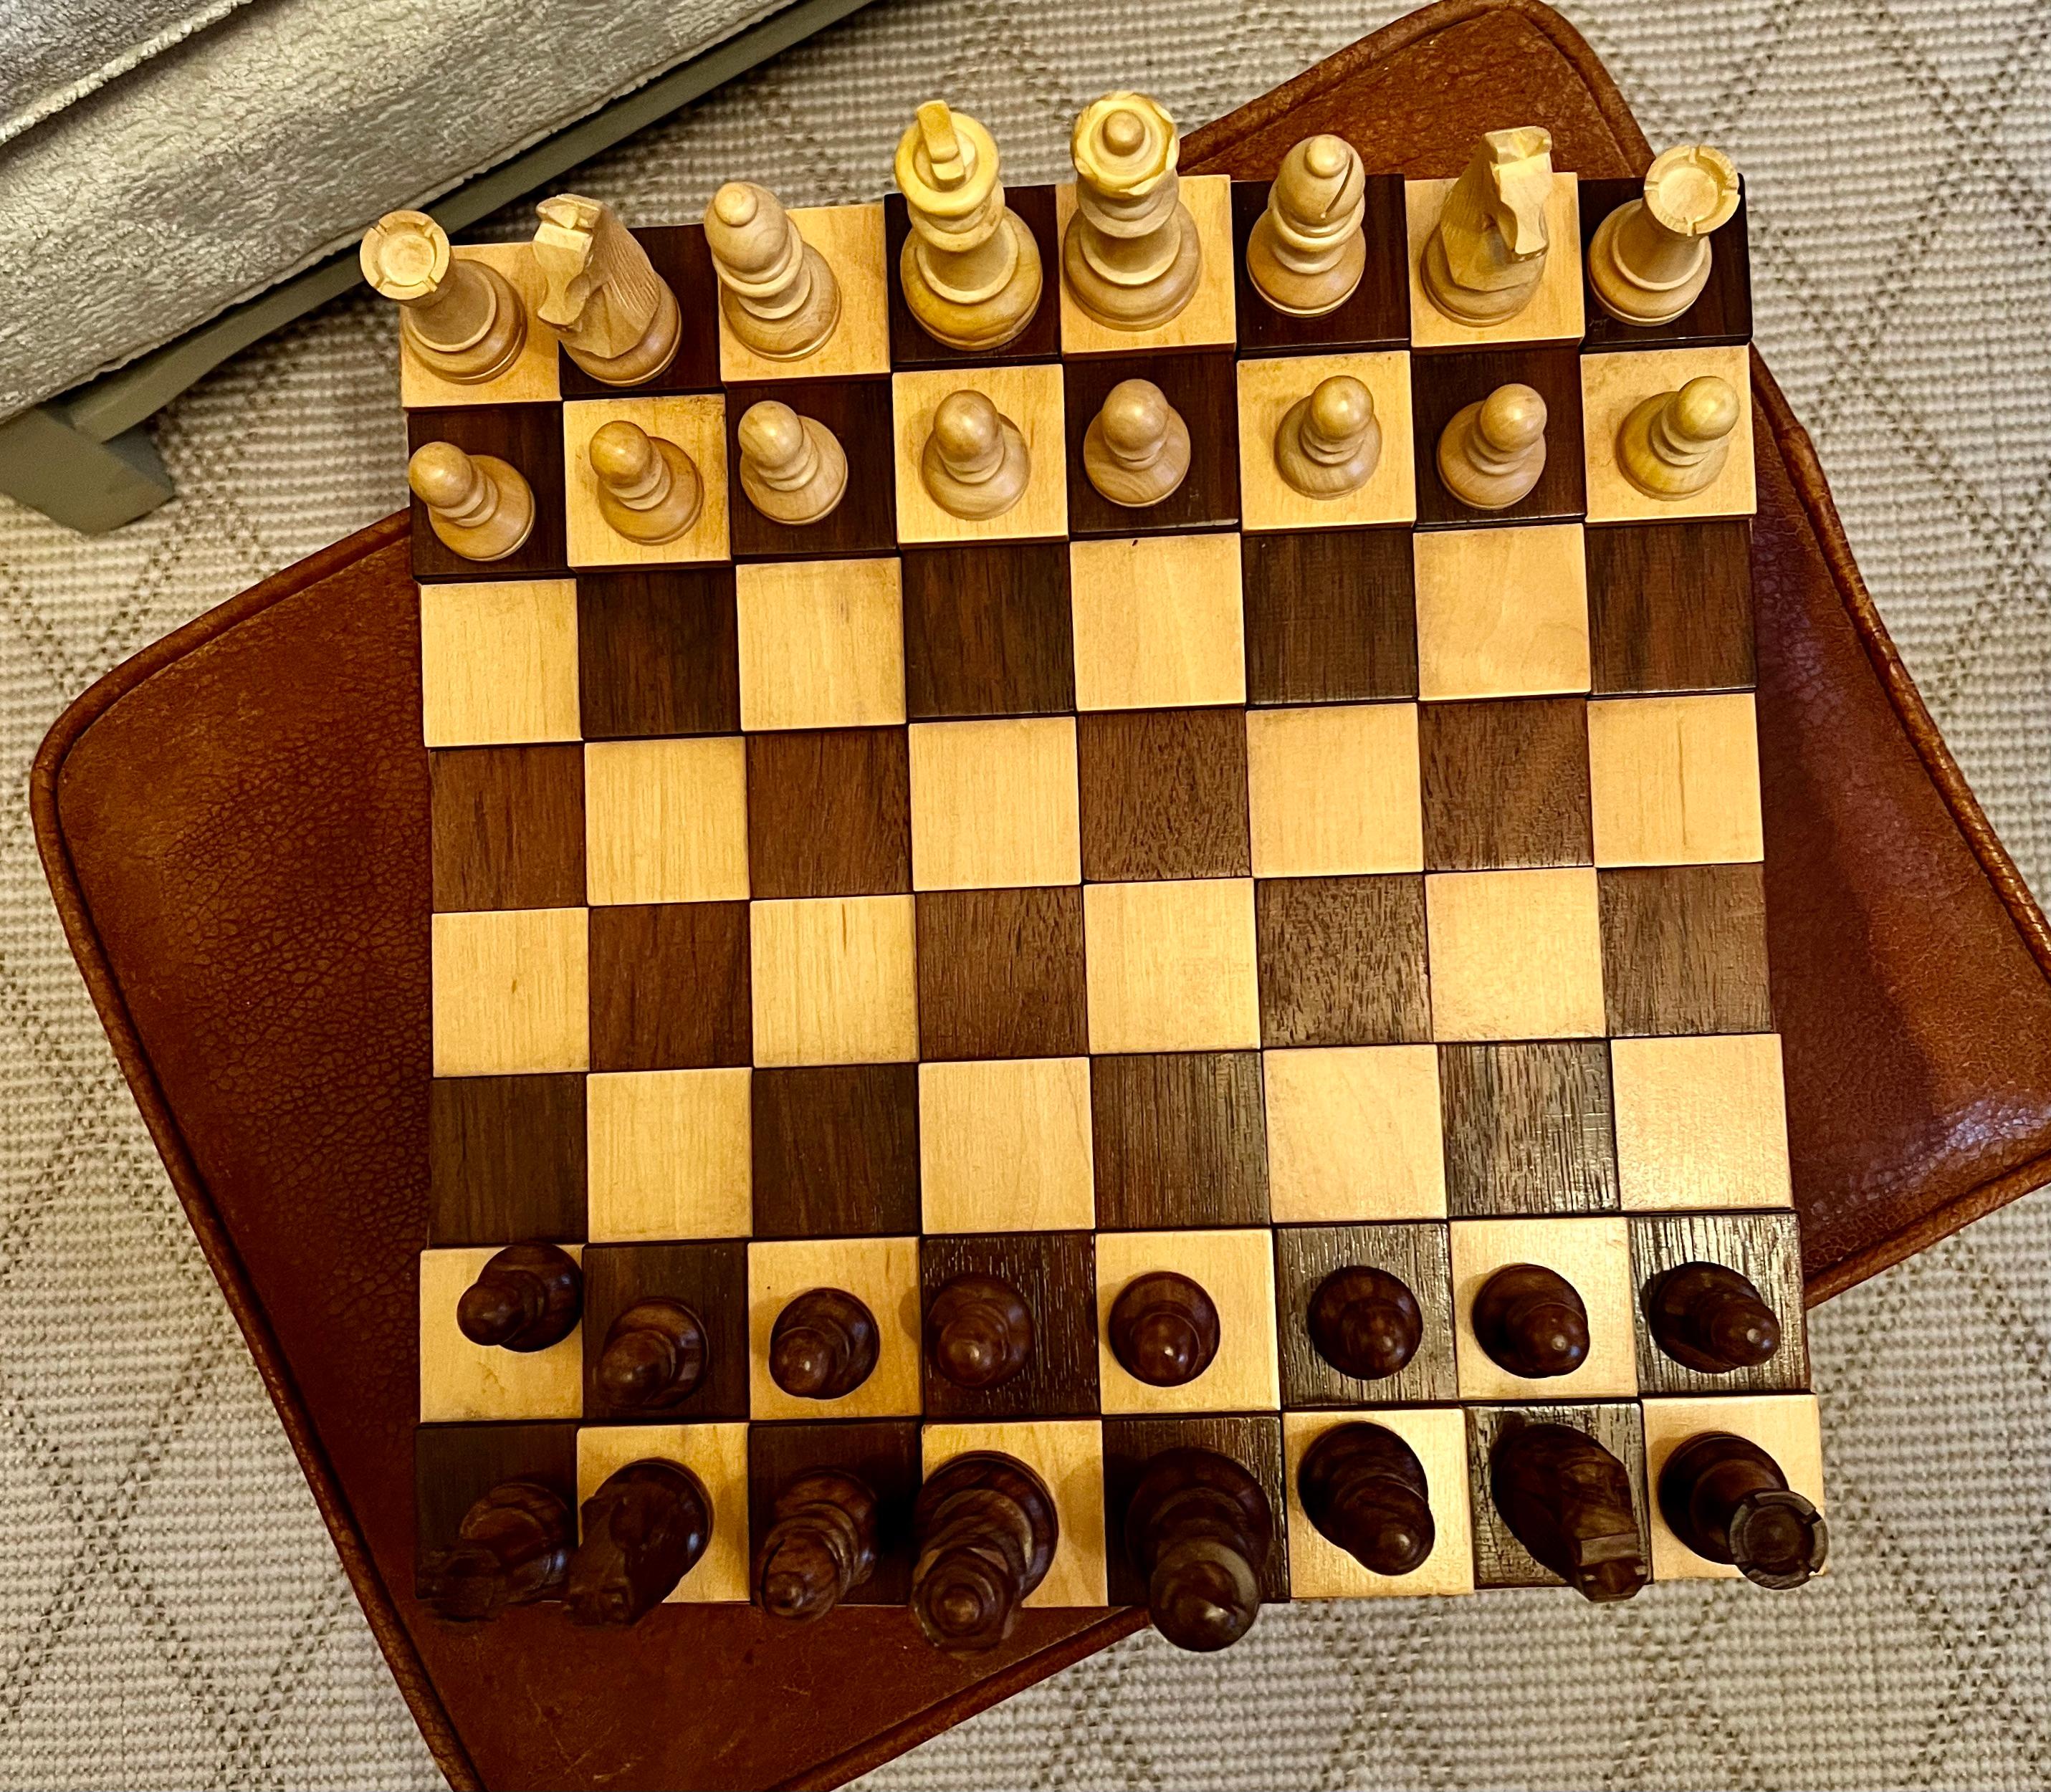 Hand-Crafted 3 Dimensional Wooden Chess or Checker Board with Chess Players For Sale